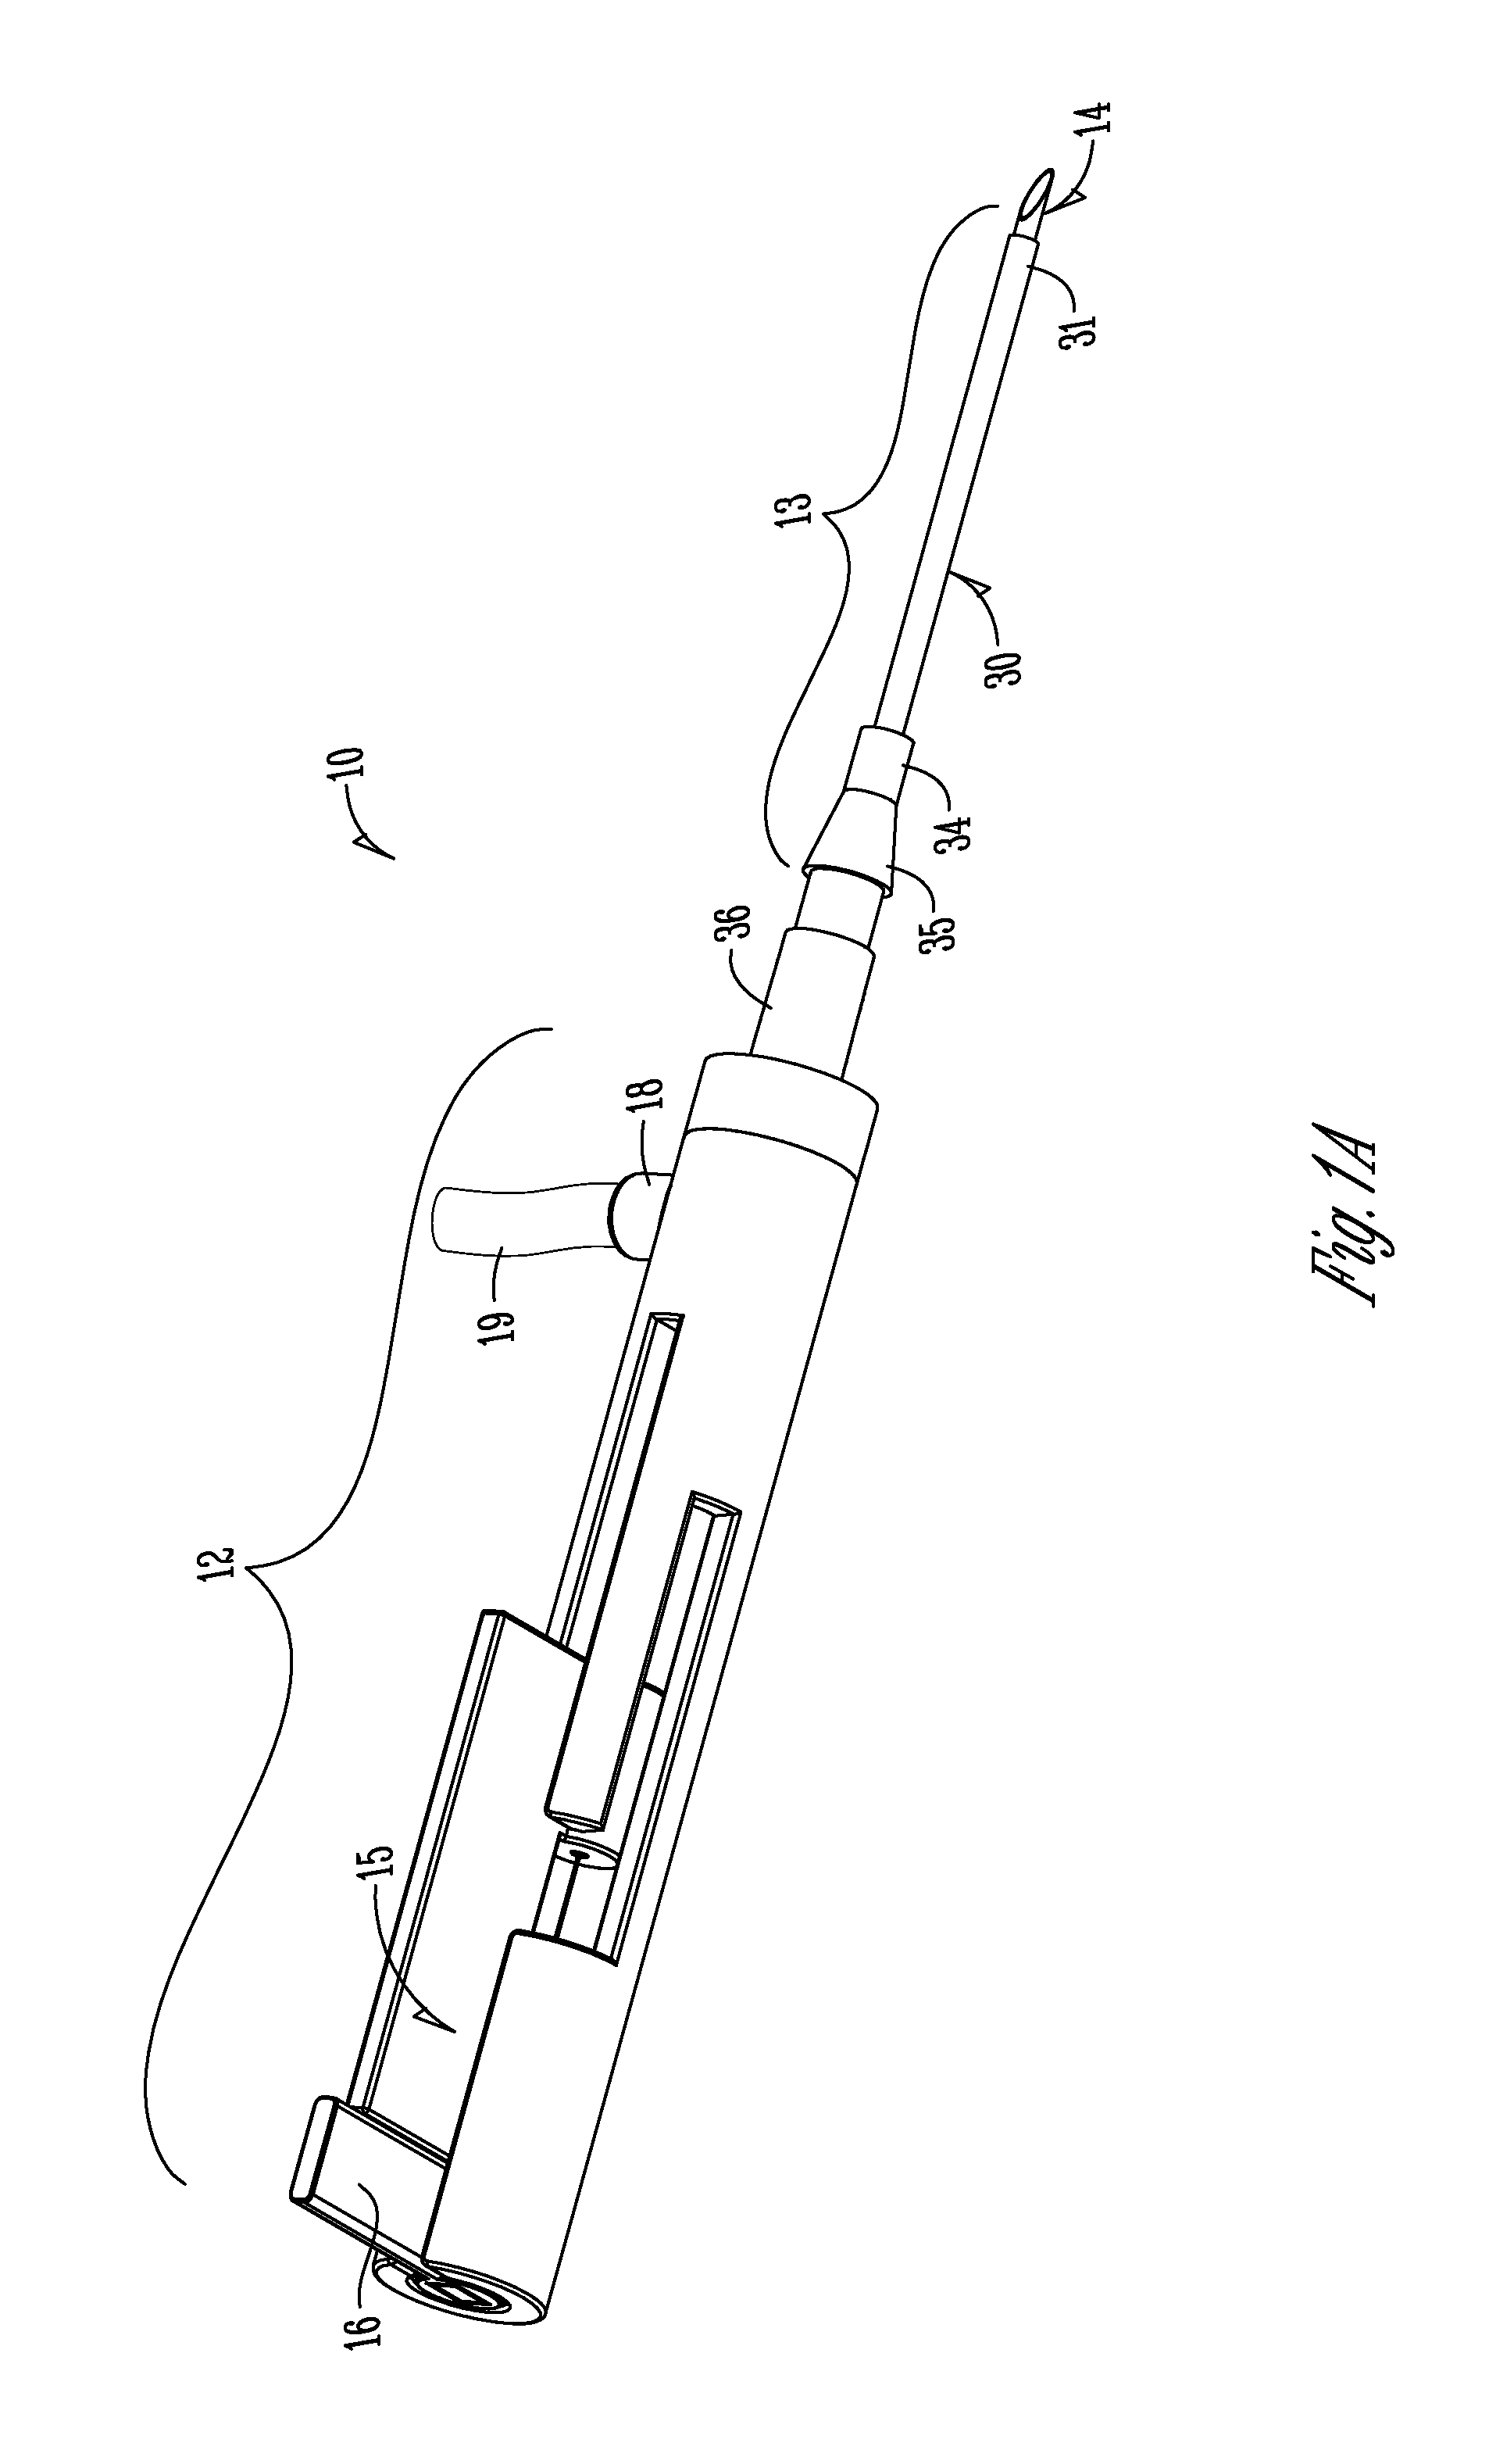 Catheter assembly with segmented stabilization system